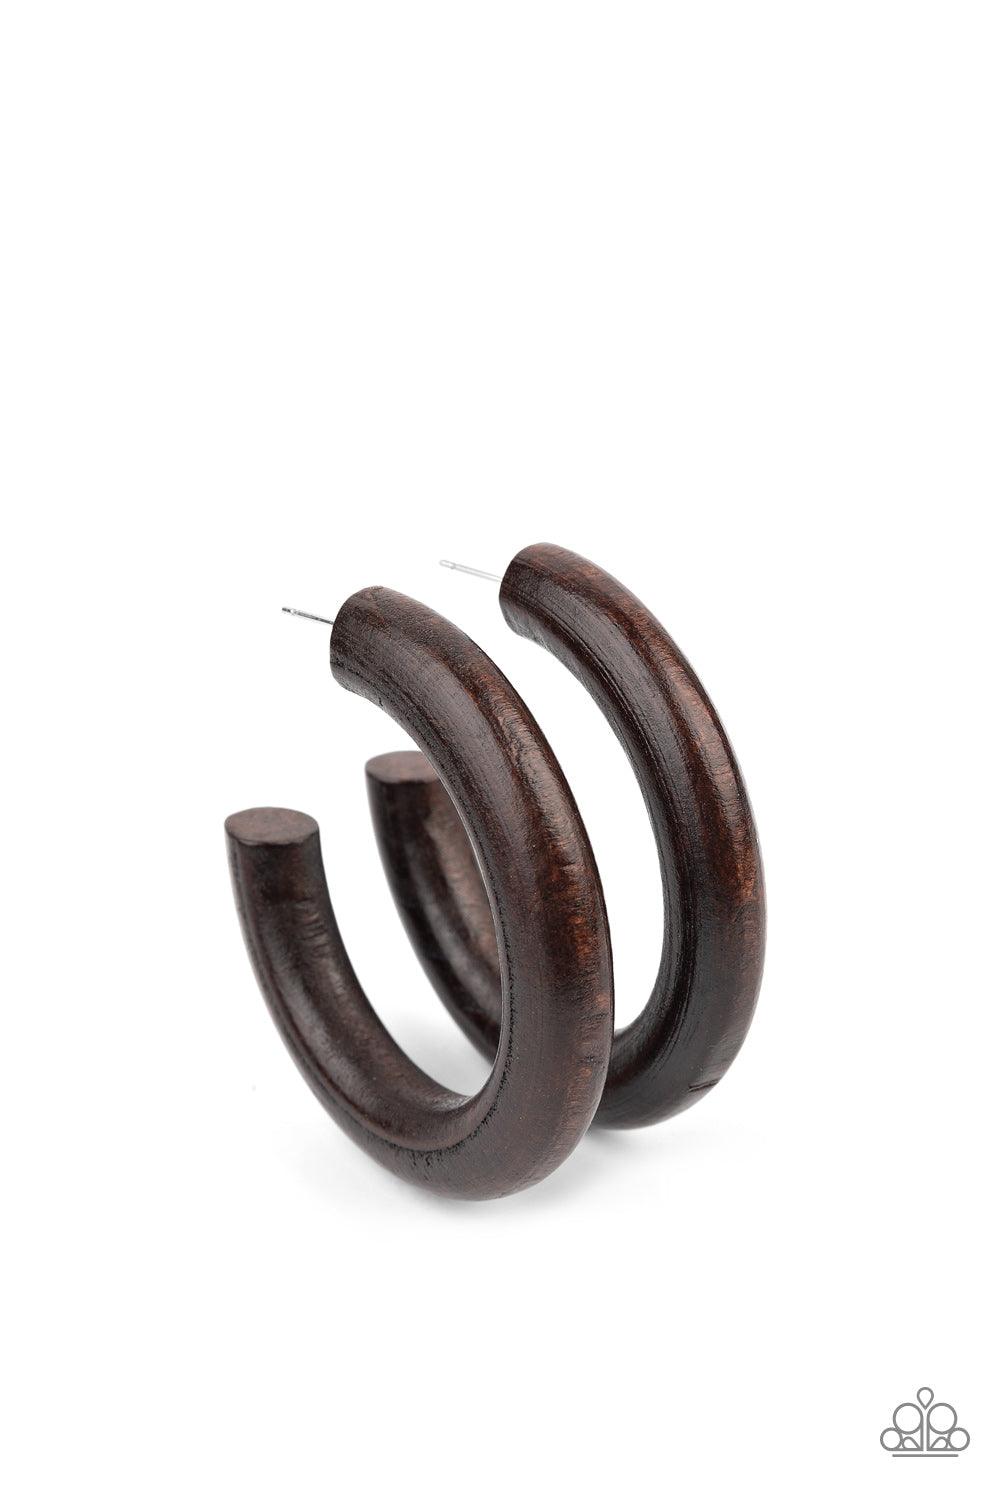 Paparazzi Accessories Woodsy Wonder - Brown Painted in a neutral brown finish, a thick wooden hoop curls around the ear for a flirtatiously earthy look. Earring attaches to a standard post fitting. Hoop measures approximately 2" in diameter. Sold as one p